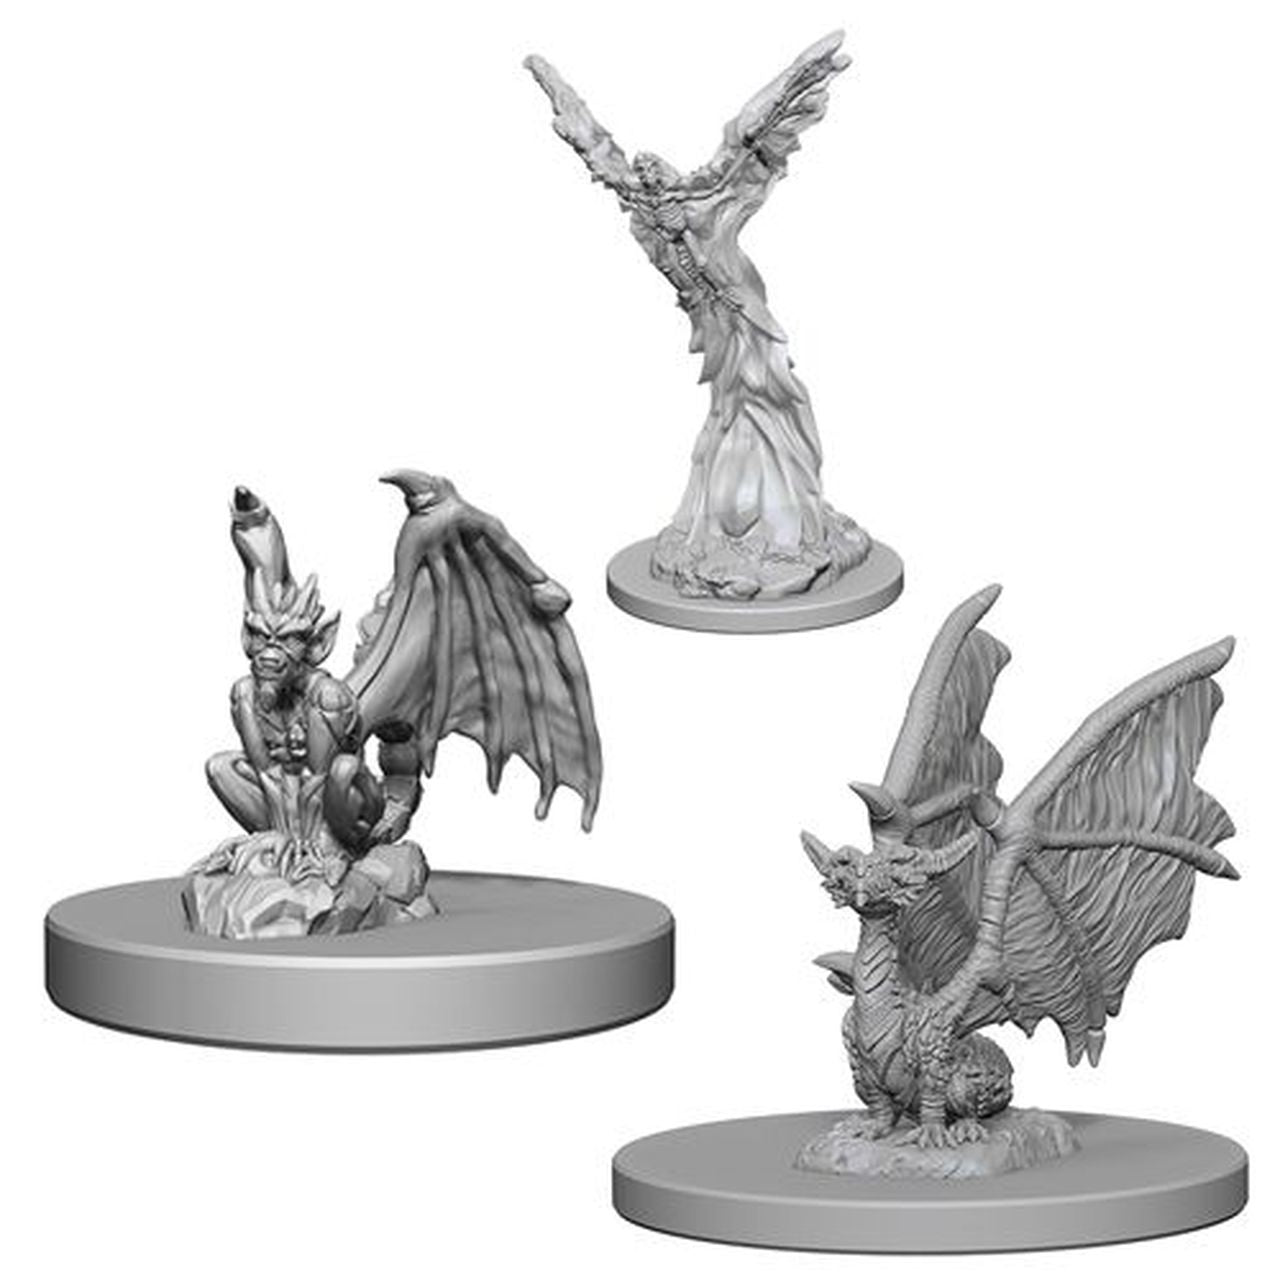 Dungeons & Dragons Nolzur’s Marvelous Miniatures: Familiars - Roleplaying Games - The Hooded Goblin